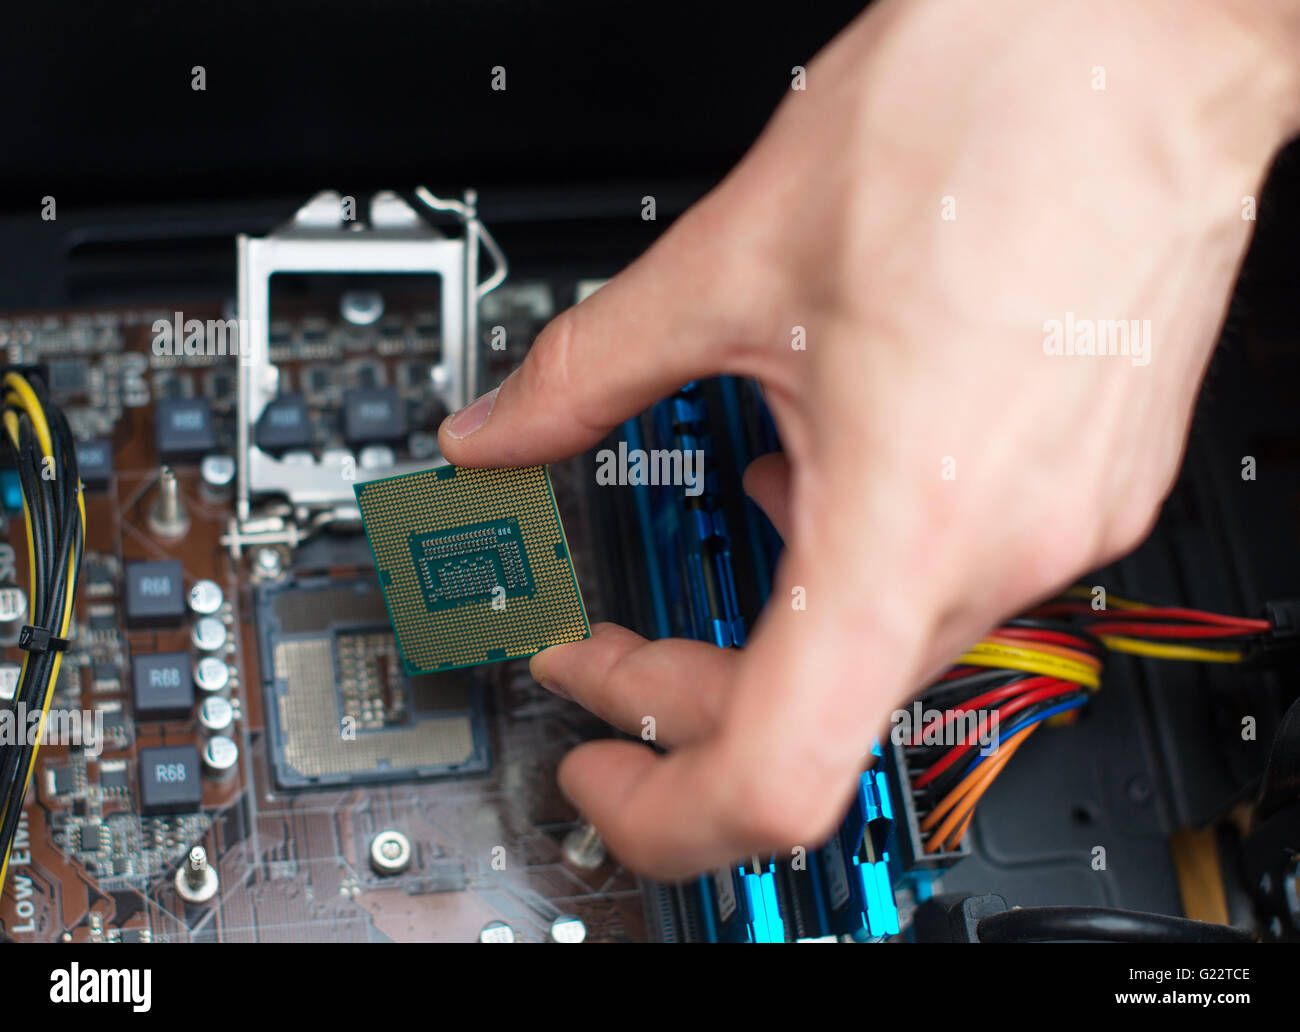 Computer technician installing CPU into motherboard. Stock Photo